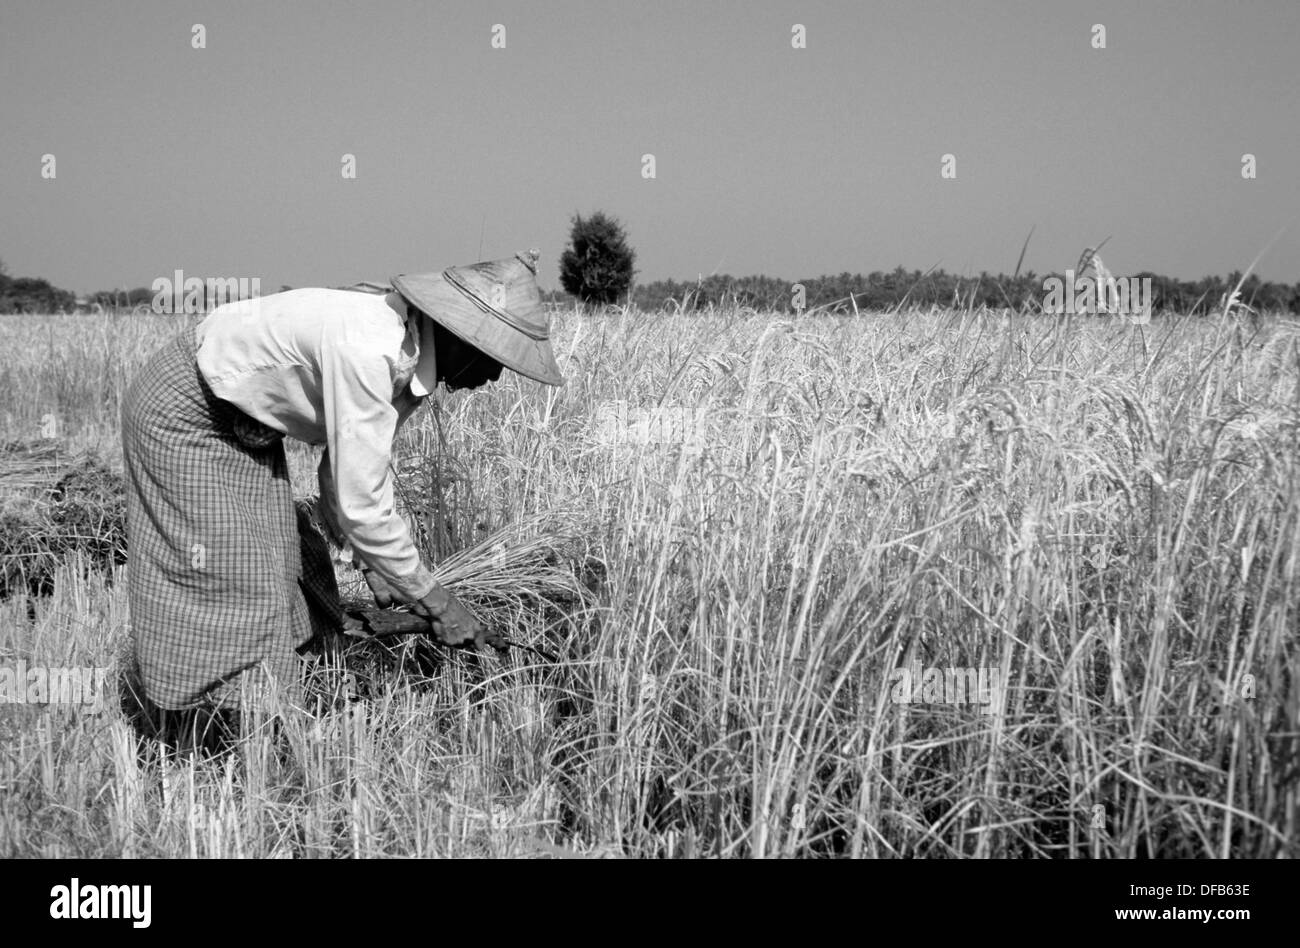 Myanmar agriculture Black and White Stock Photos & Images - Alamy